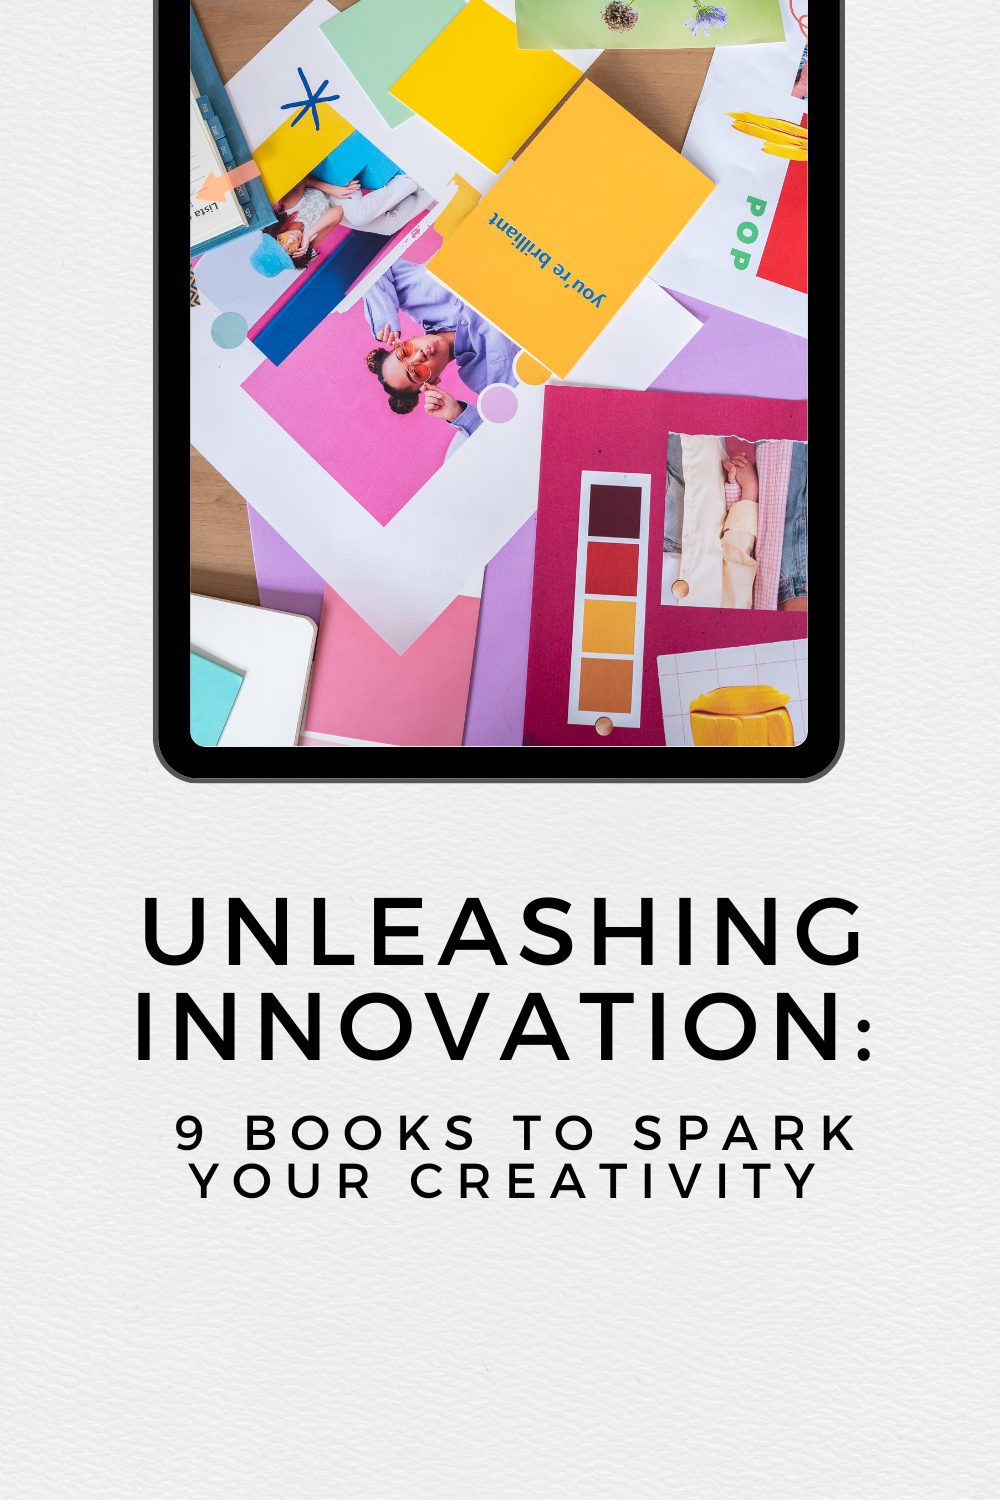 Unleashing Innovation: 9 Books to Spark Your Creativity